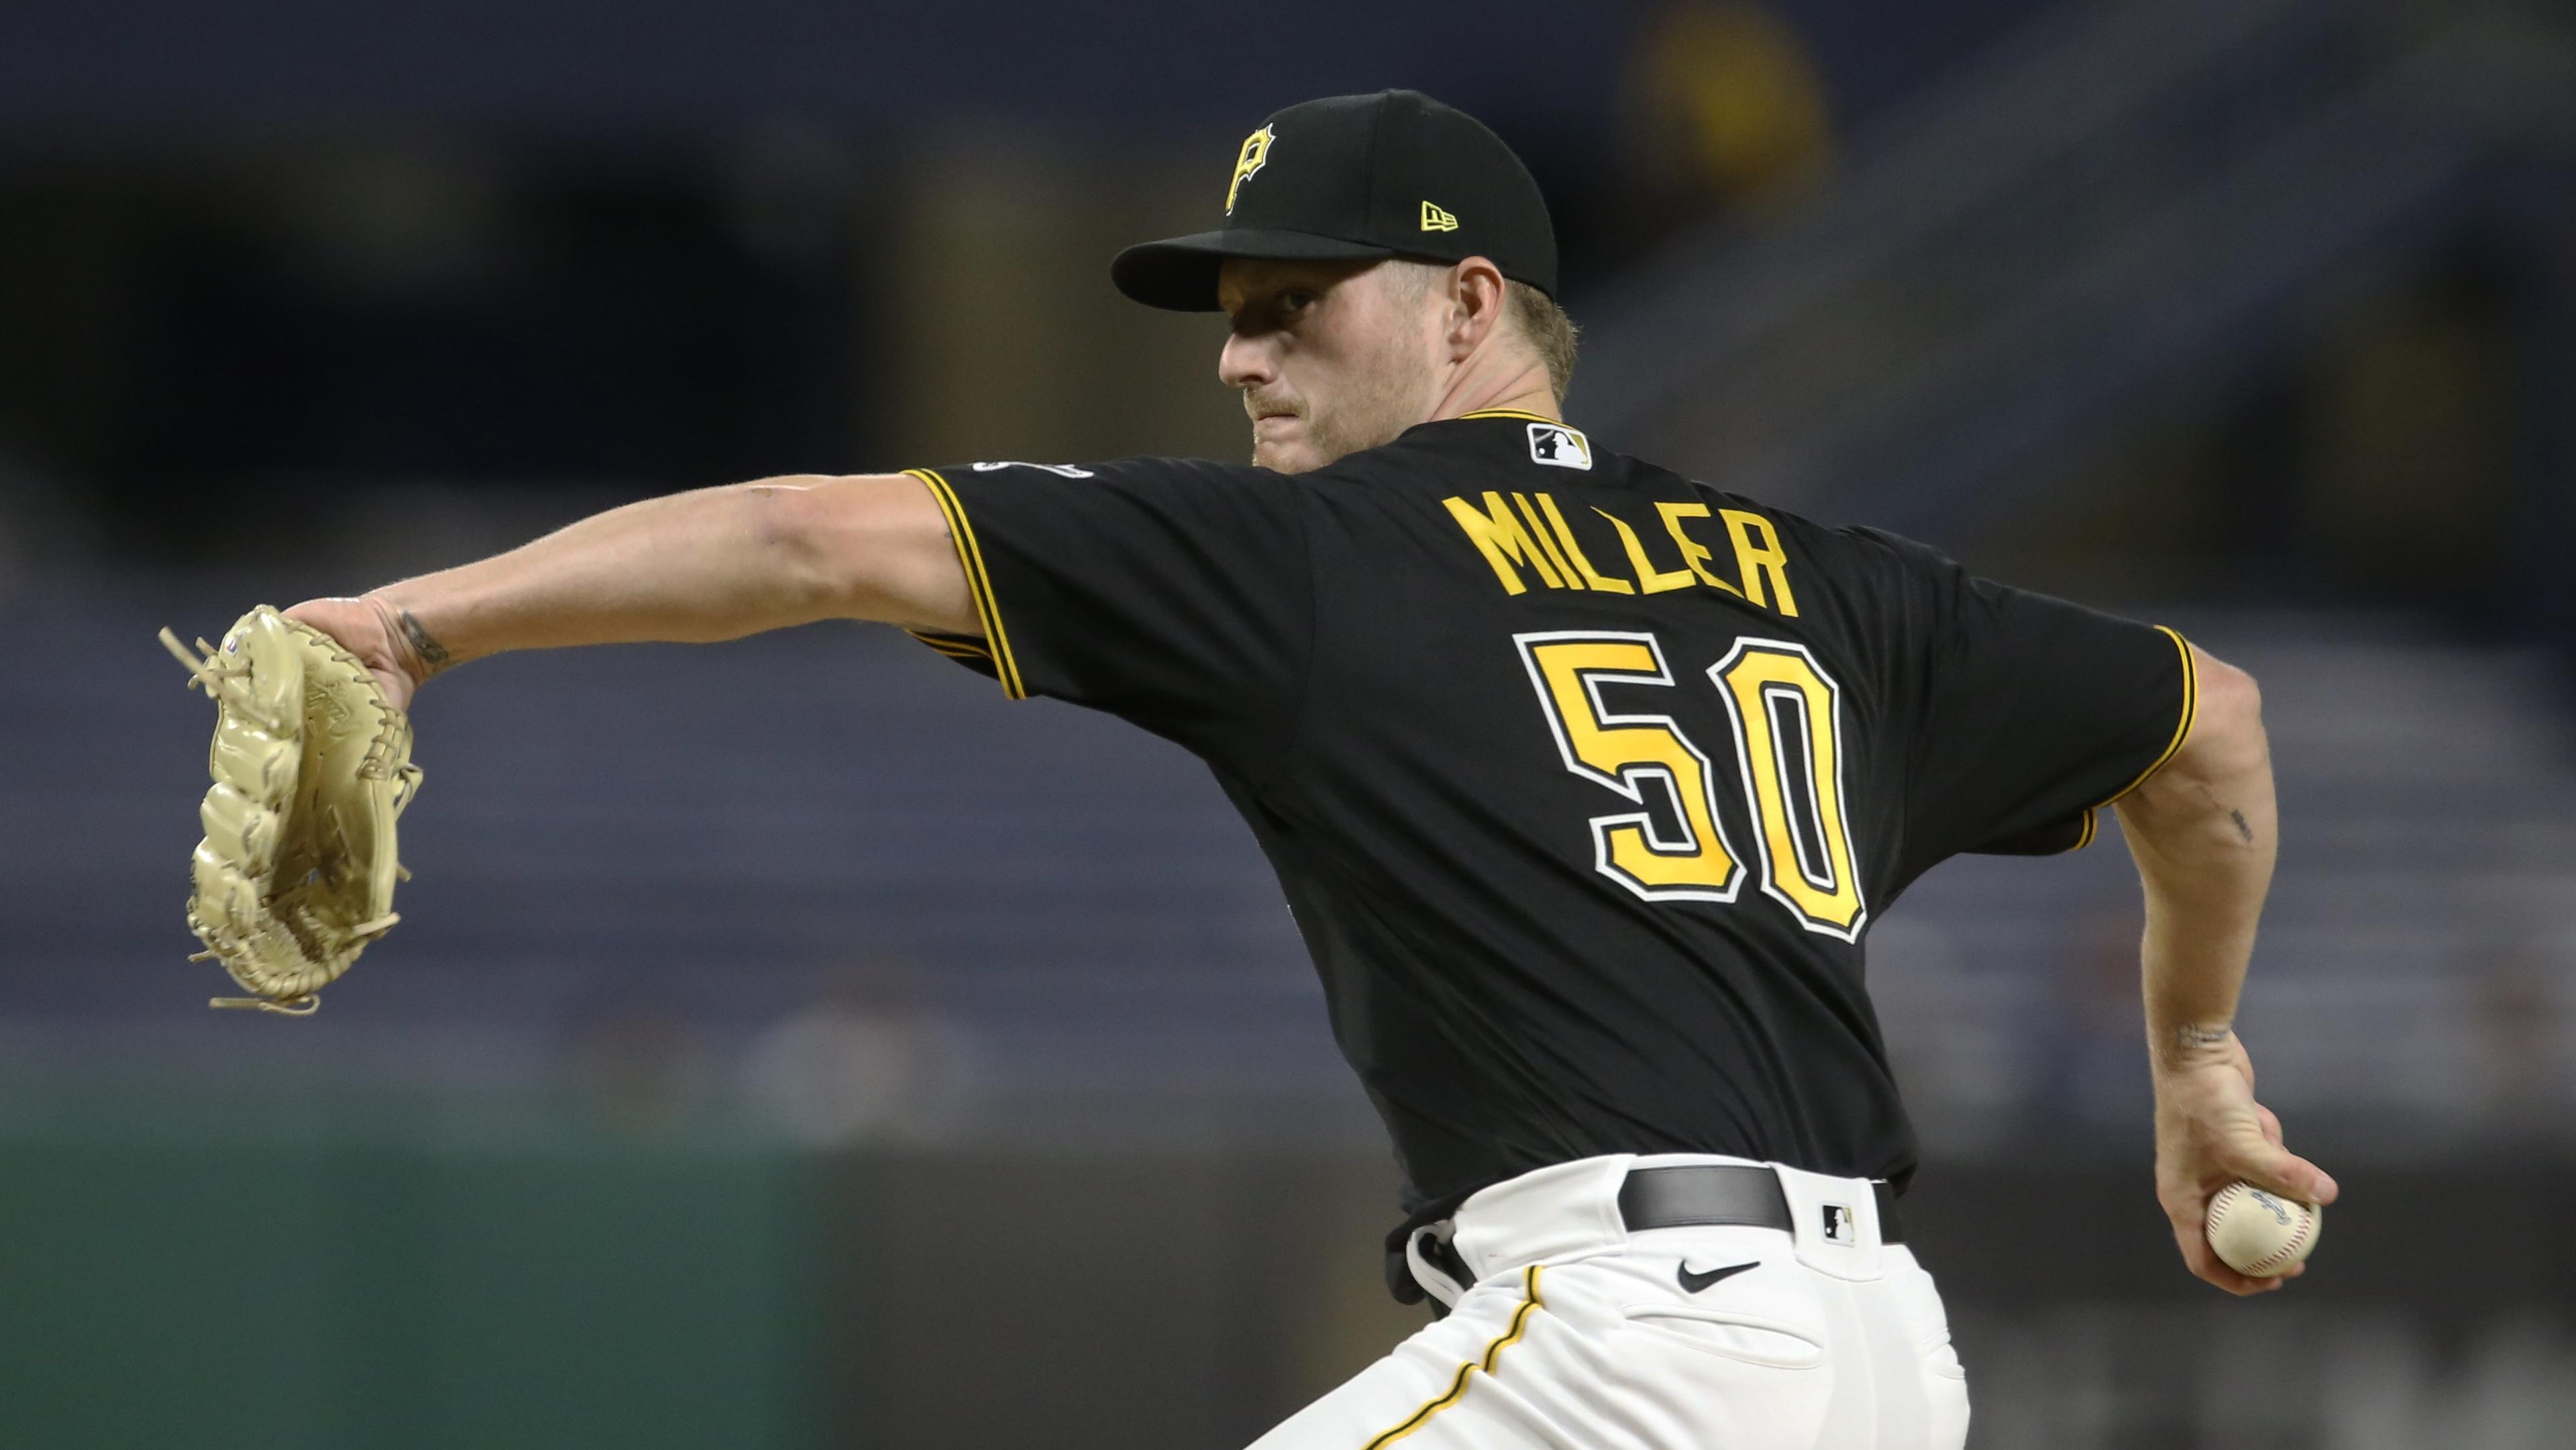 Sep 7, 2021; Pittsburgh, Pennsylvania, USA; Pittsburgh Pirates relief pitcher Shelby Miller (50) pitches against the Detroit Tigers during the fifth inning at PNC Park. Mandatory Credit: Charles LeClaire-USA TODAY Sports / Charles LeClaire-USA TODAY Sports